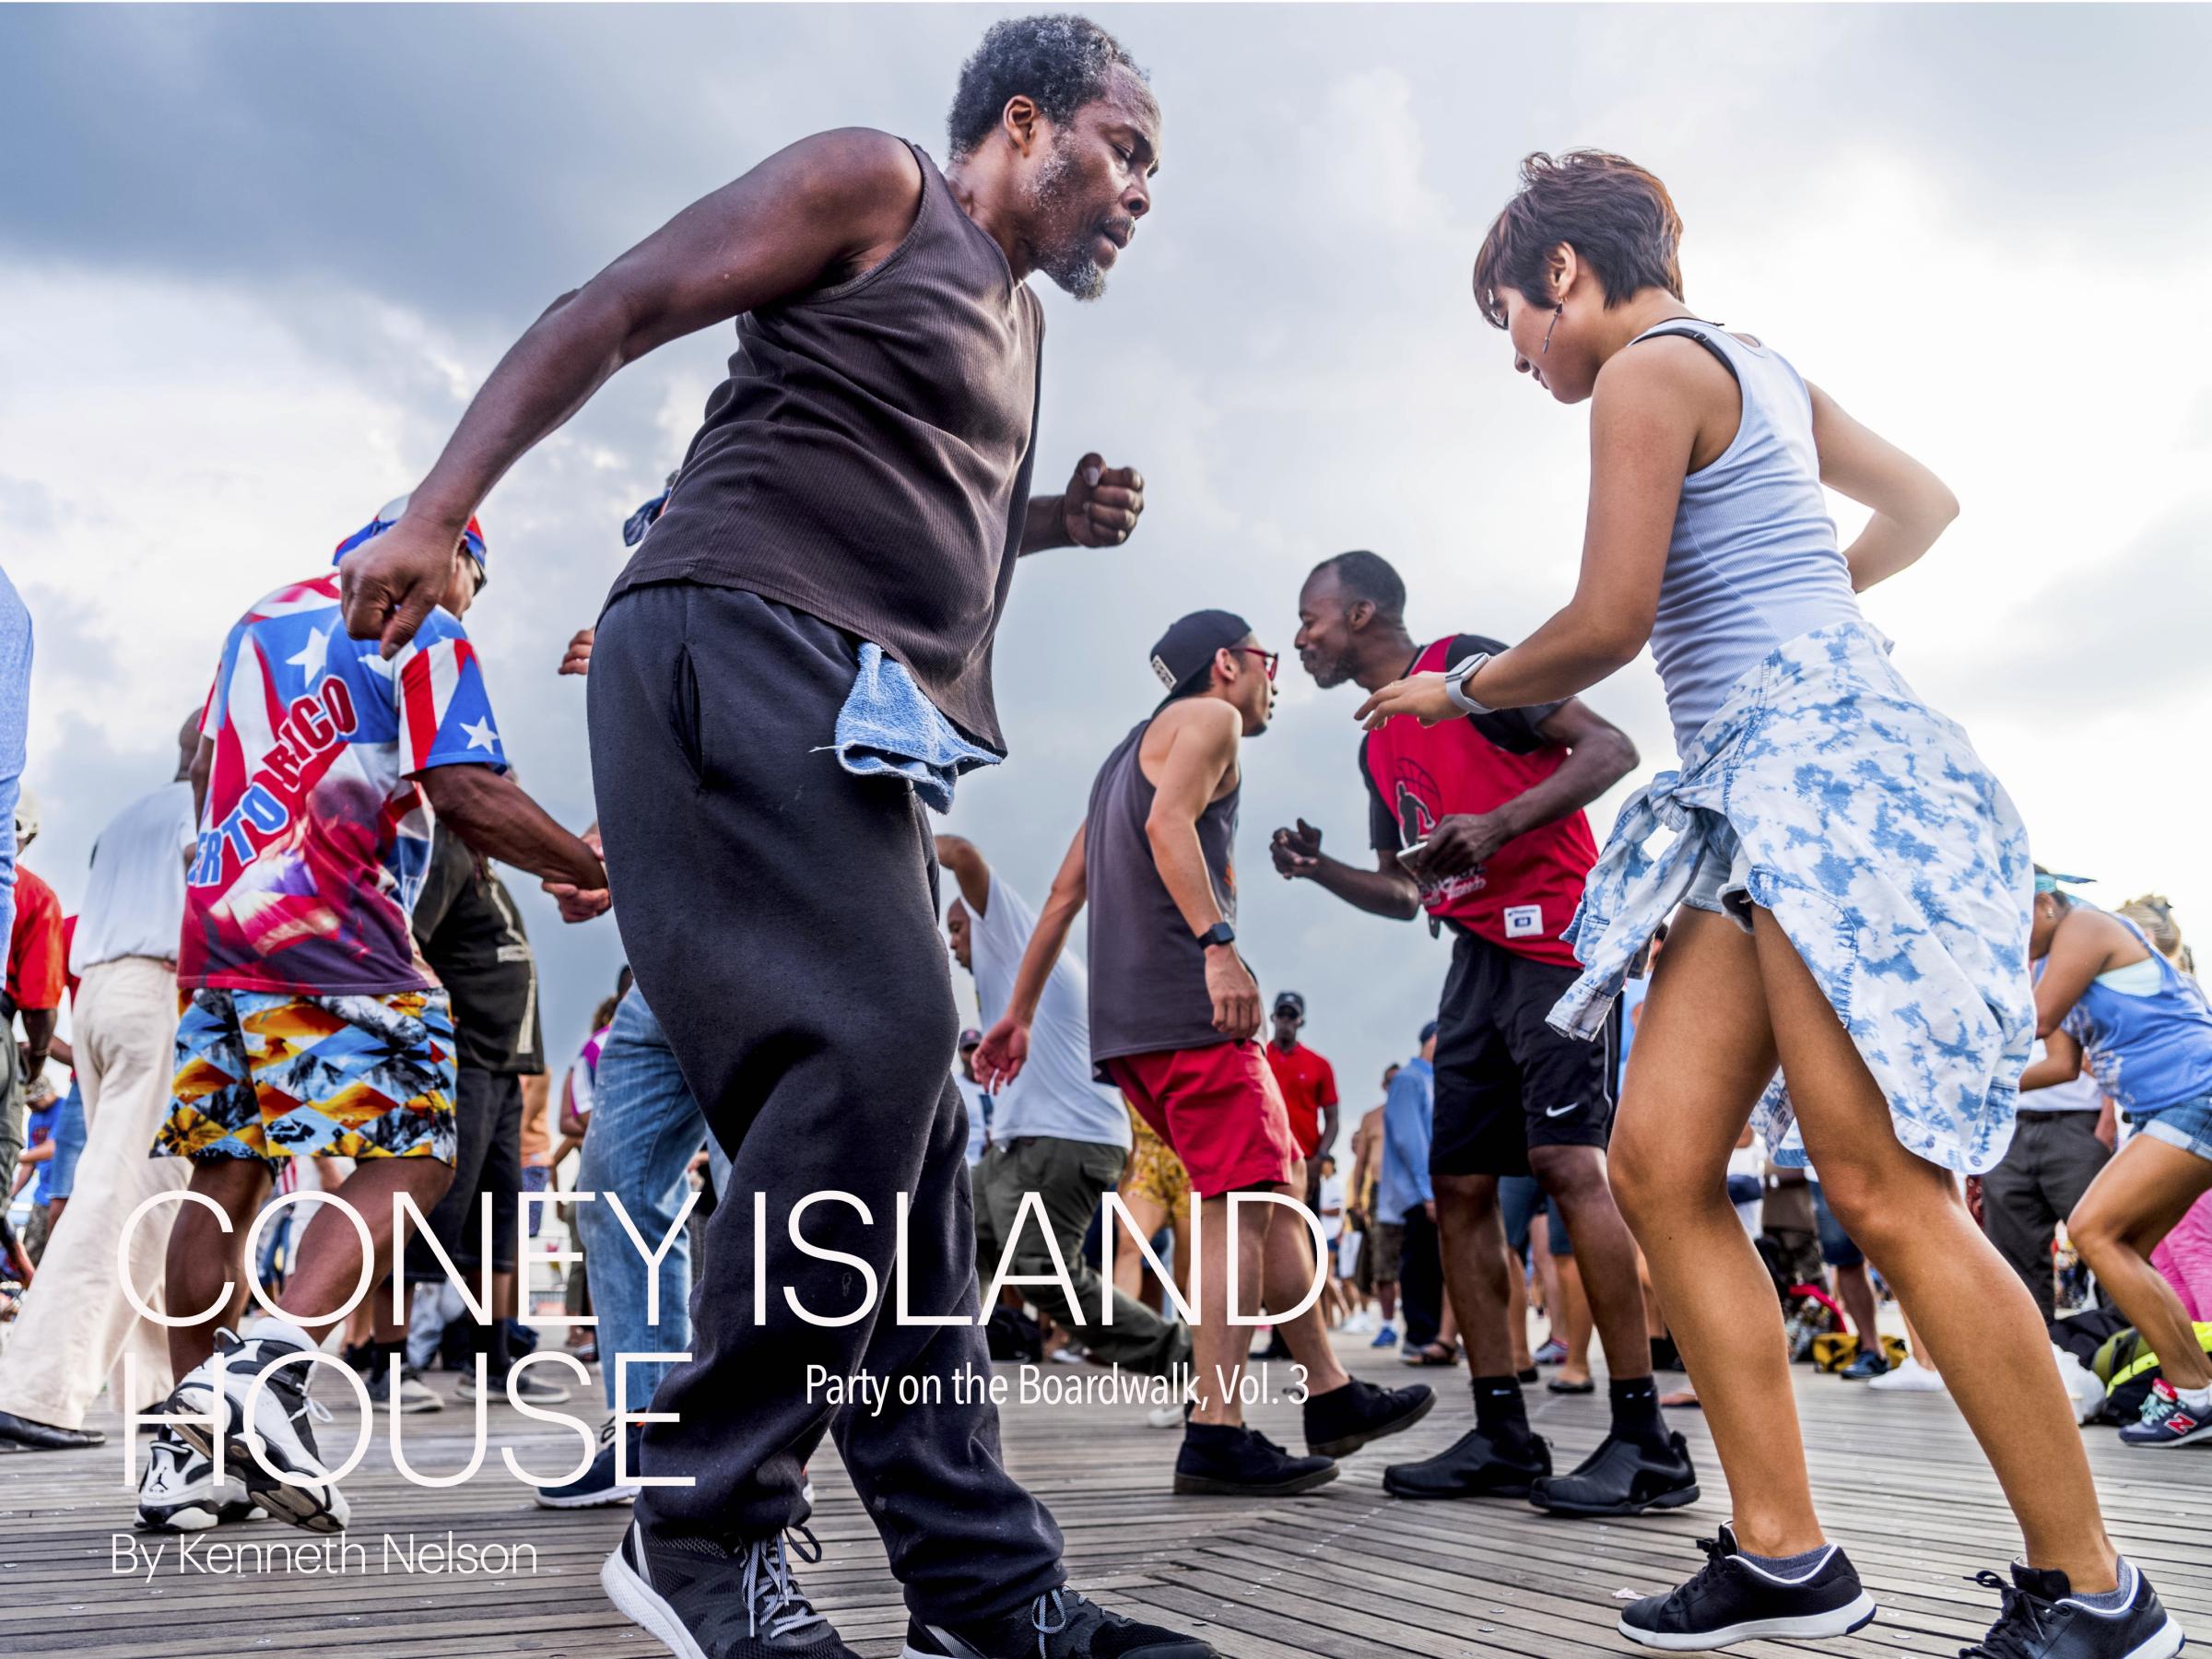 Coney Island House - A House Head's affection to the genre of House Music...